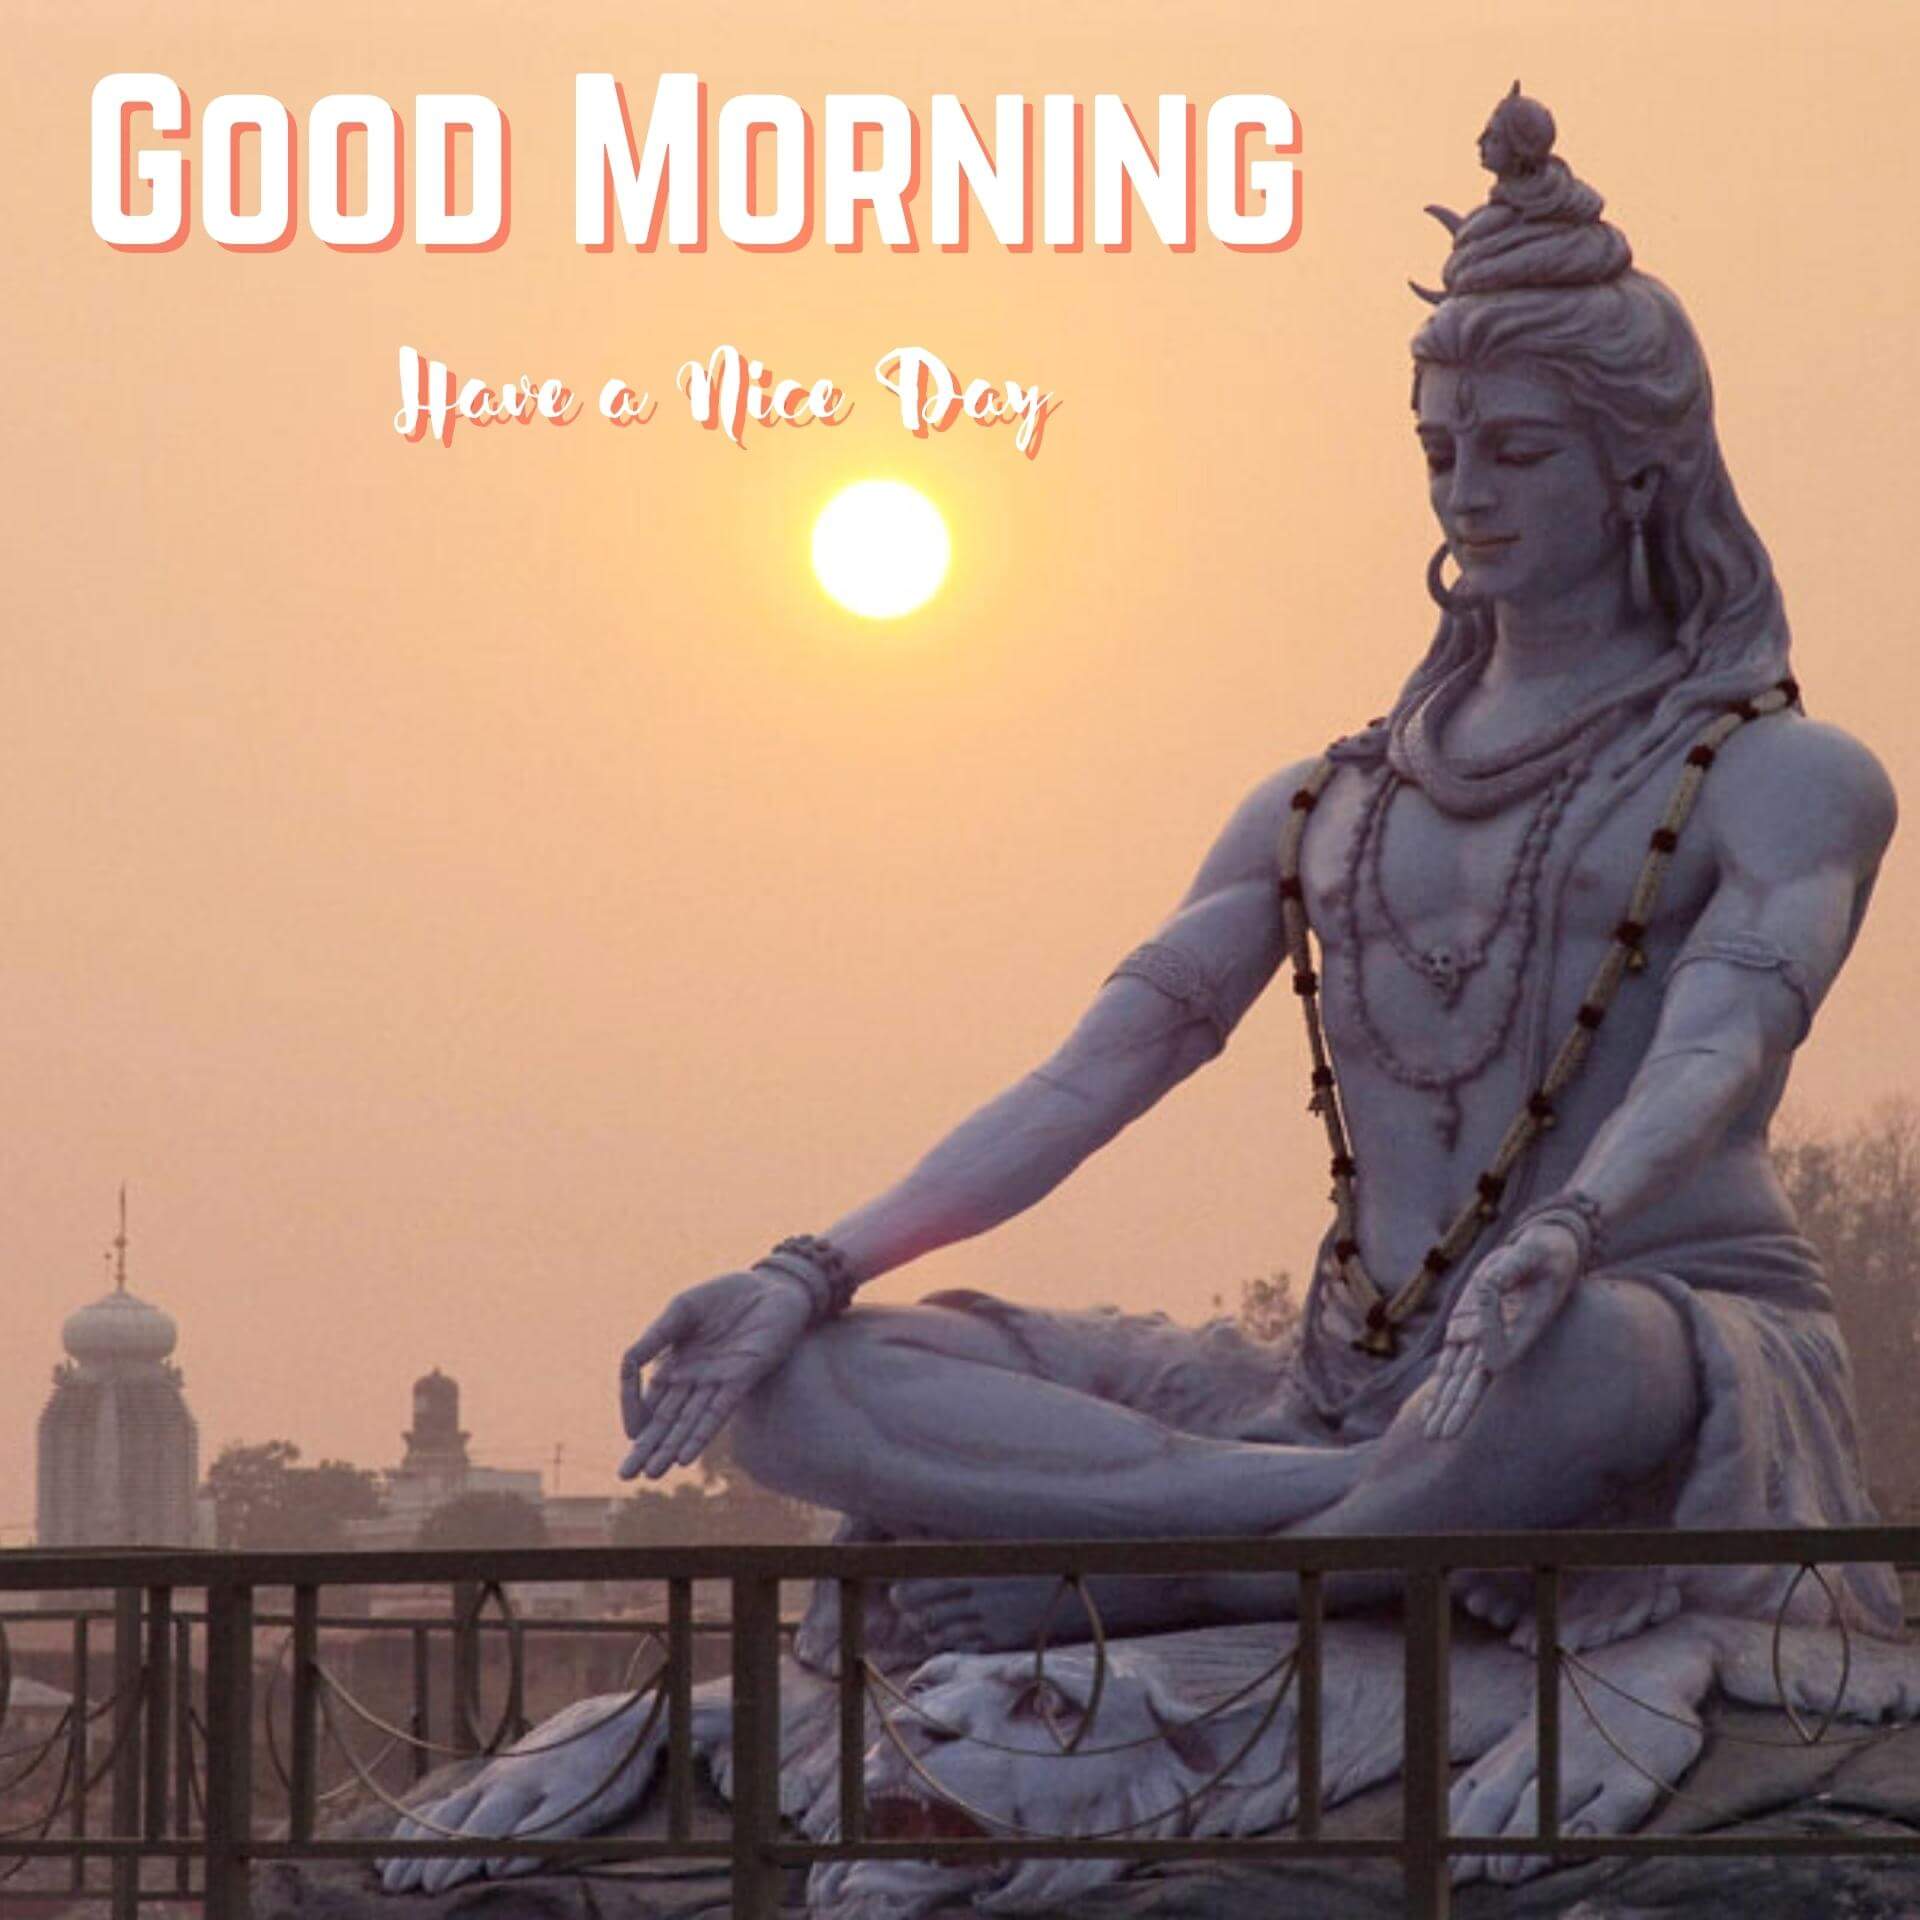 Shiva Good Morning Images Wallpaper Download for Whatsapp